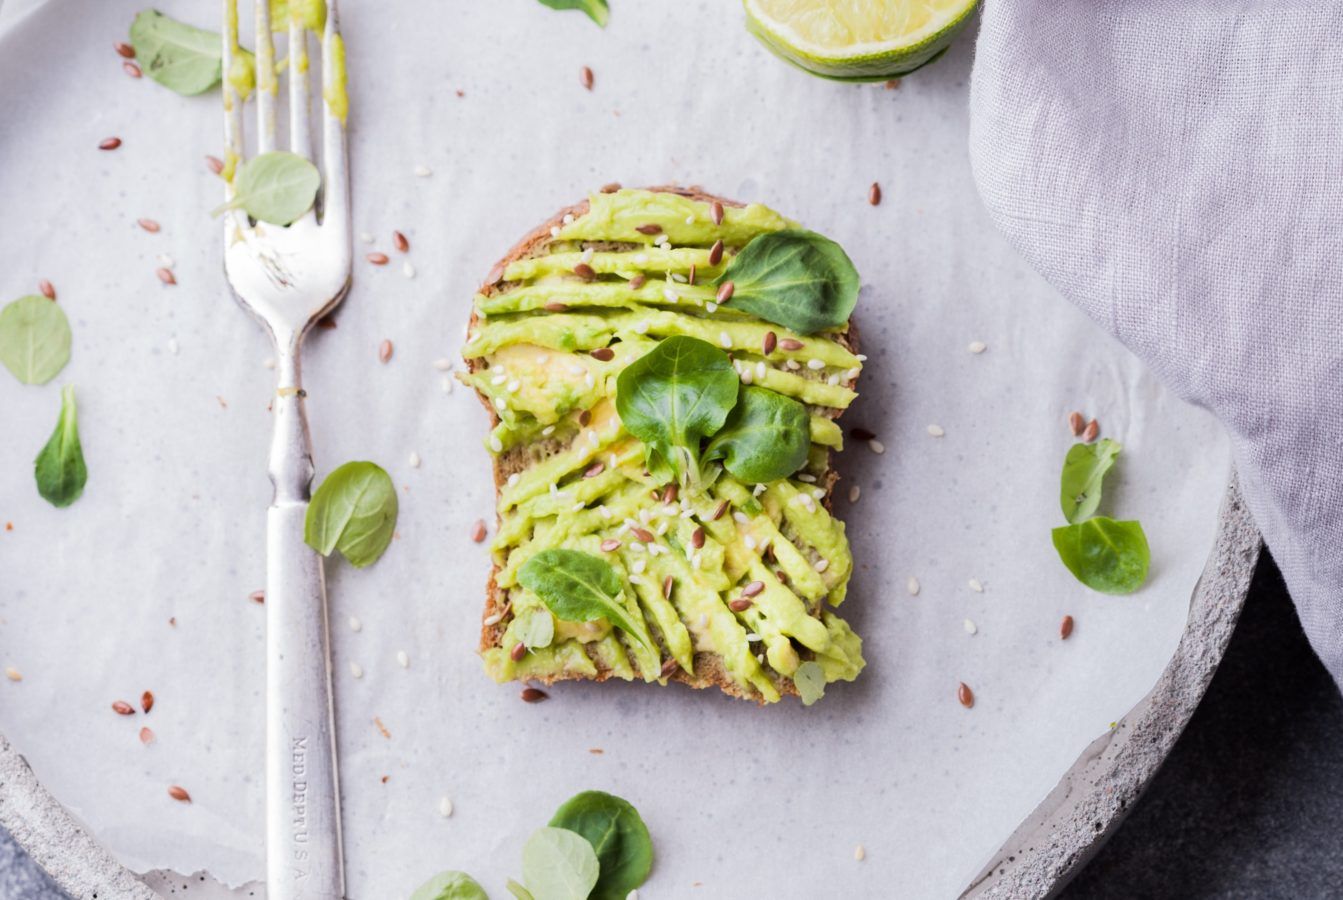 Avocados are bad for the environment, here’s why (plus alternatives to try)